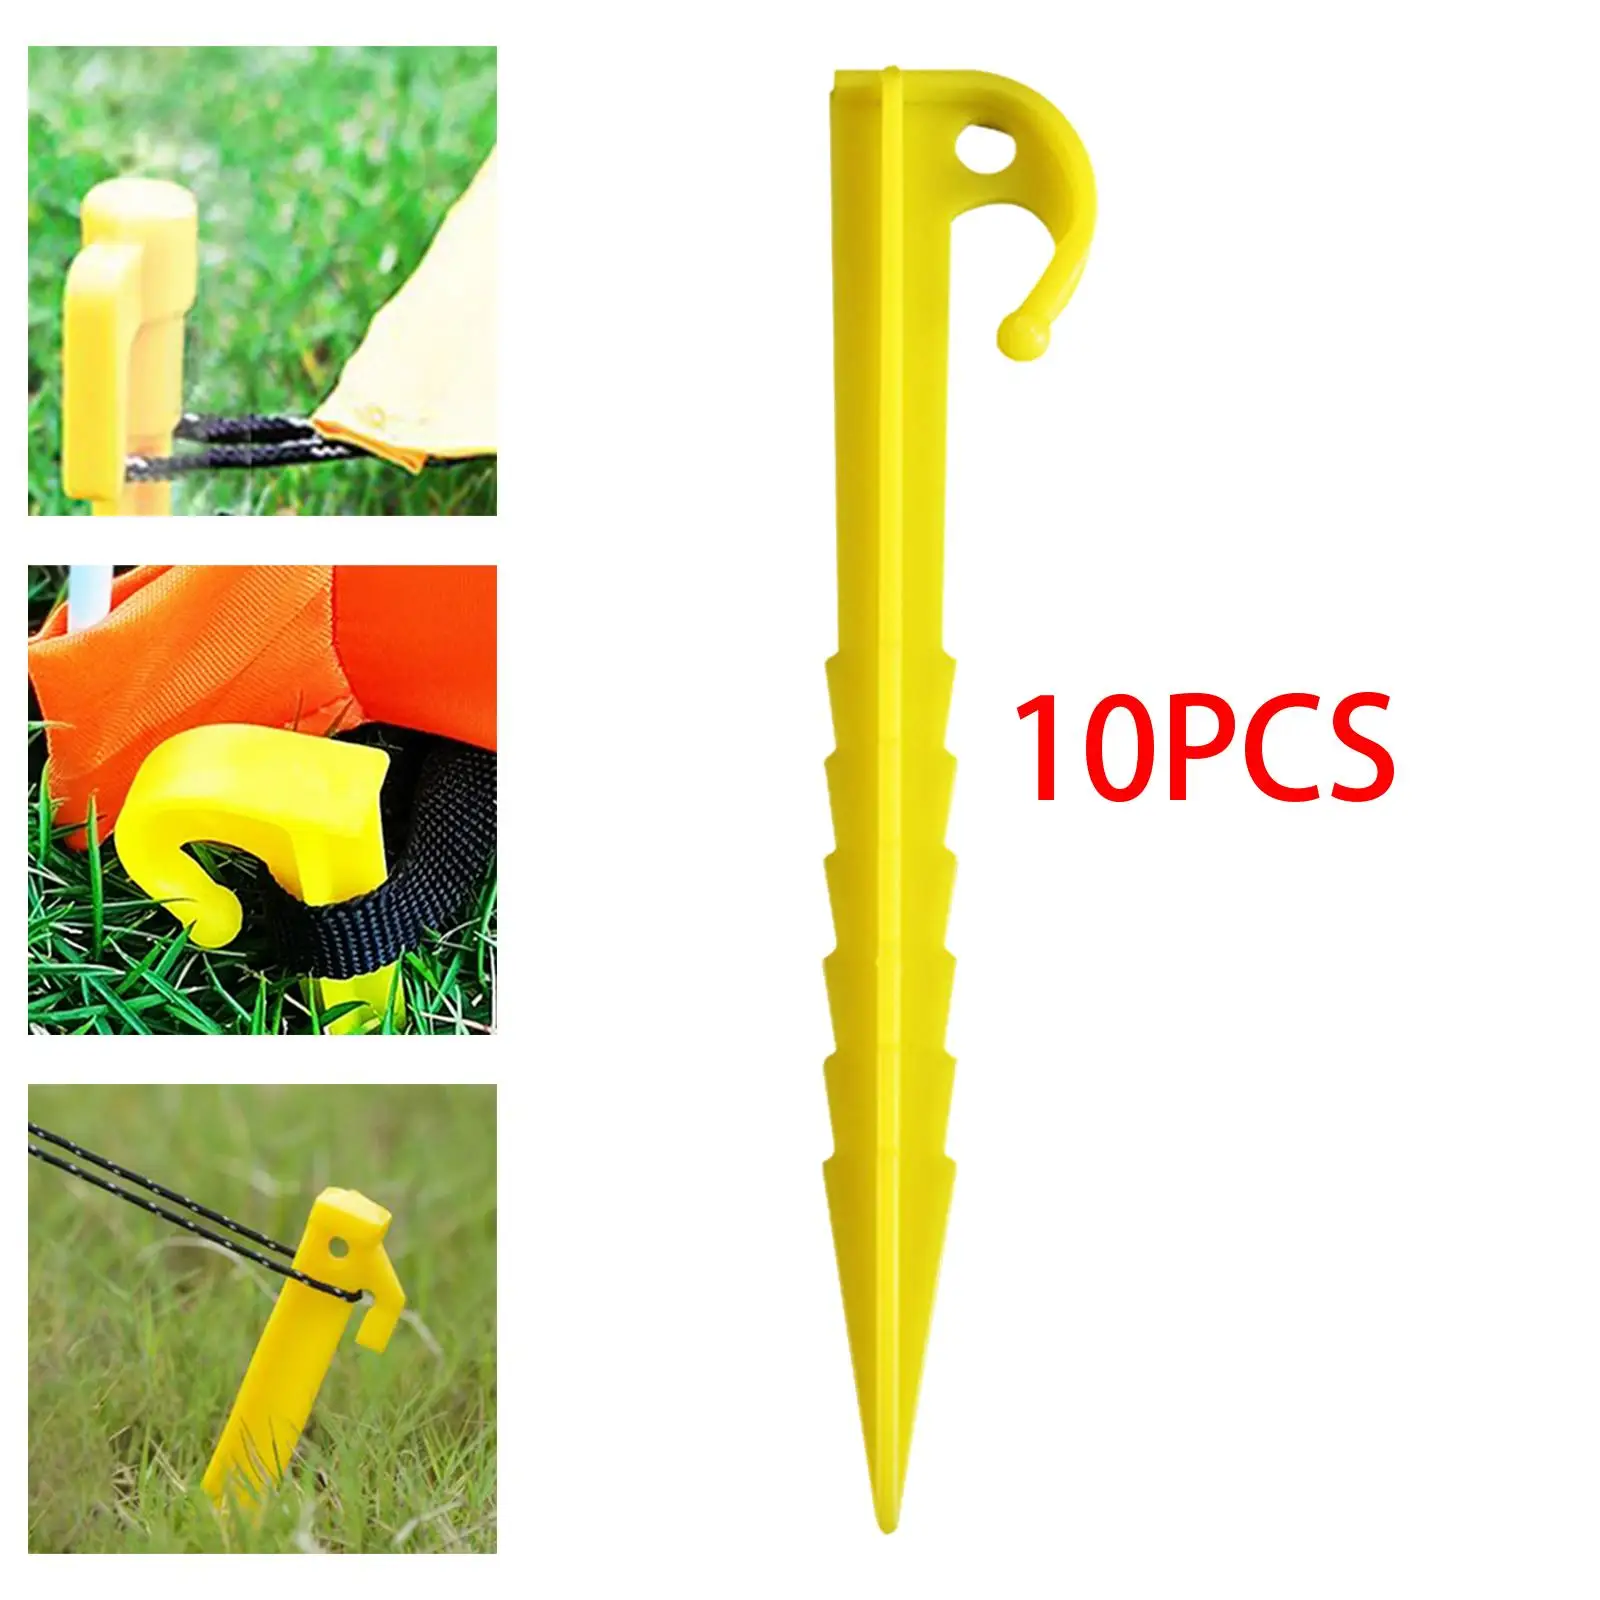 10 Pieces Lightweight Tent Stakes Tent Nails Pegs Sand Rust-Proof Ground Anchoring Pegs for Camping Canopy Accessories